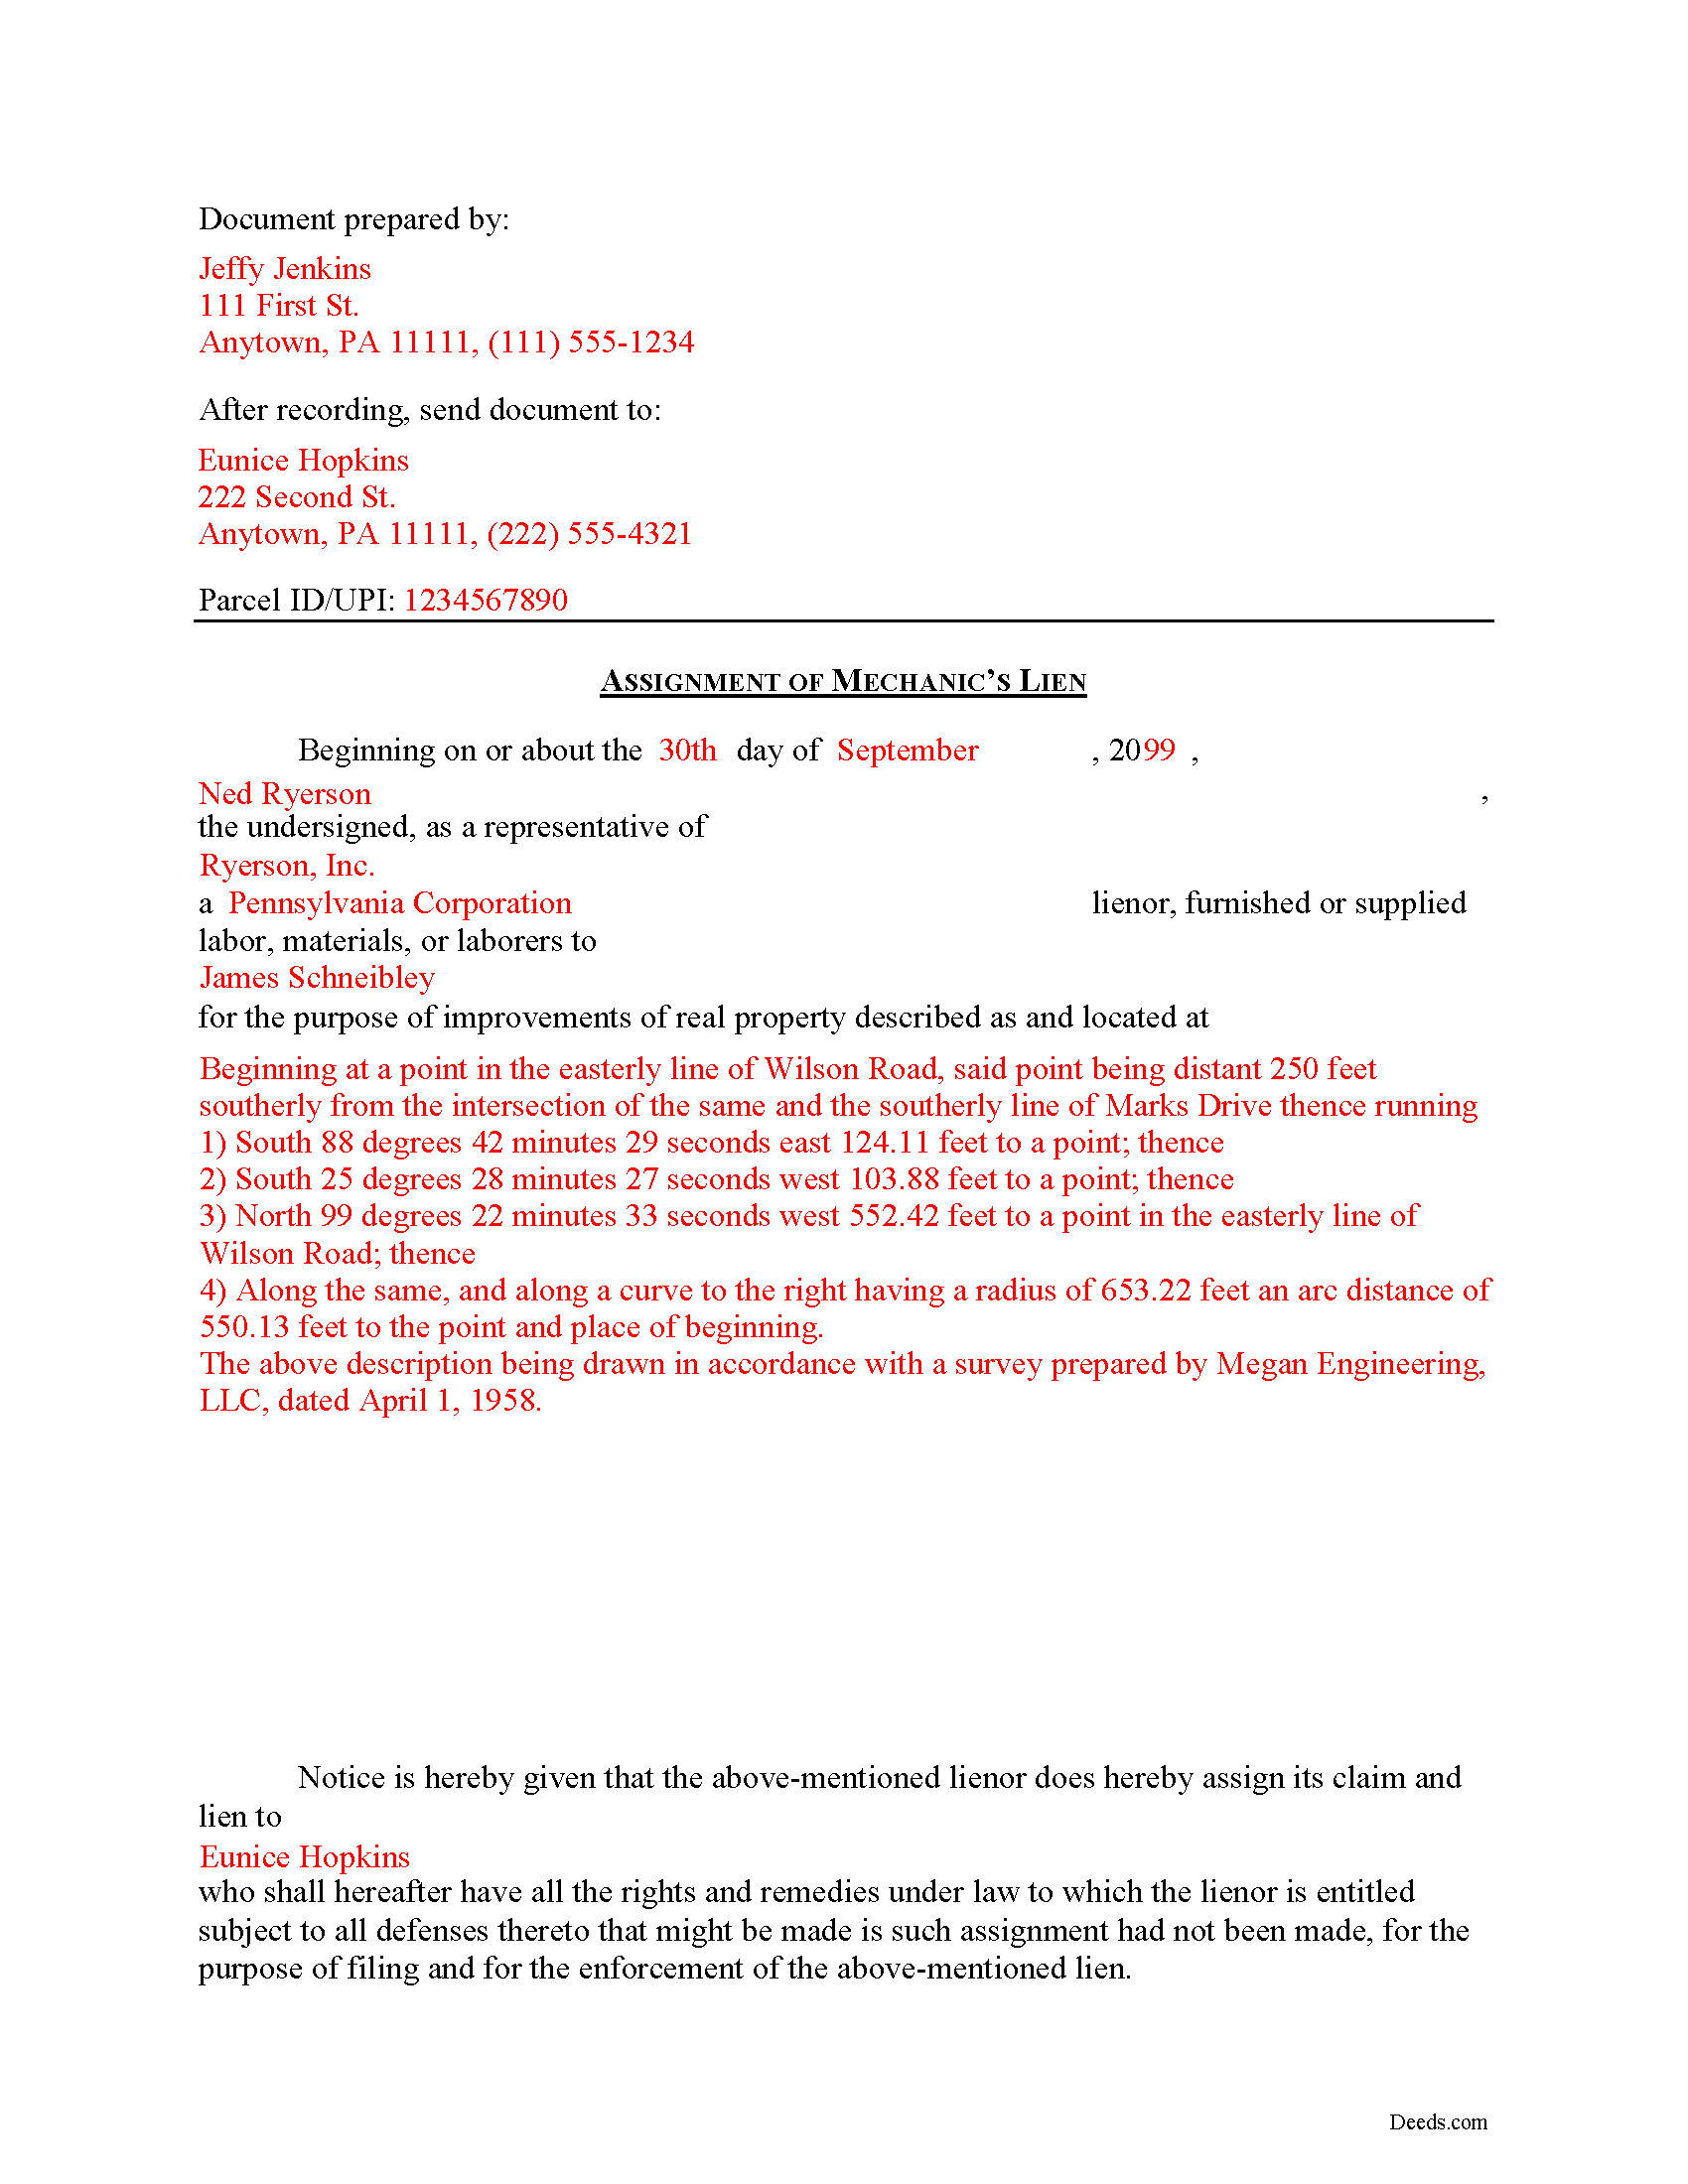 Completed Example of the Assignment of Lien Document